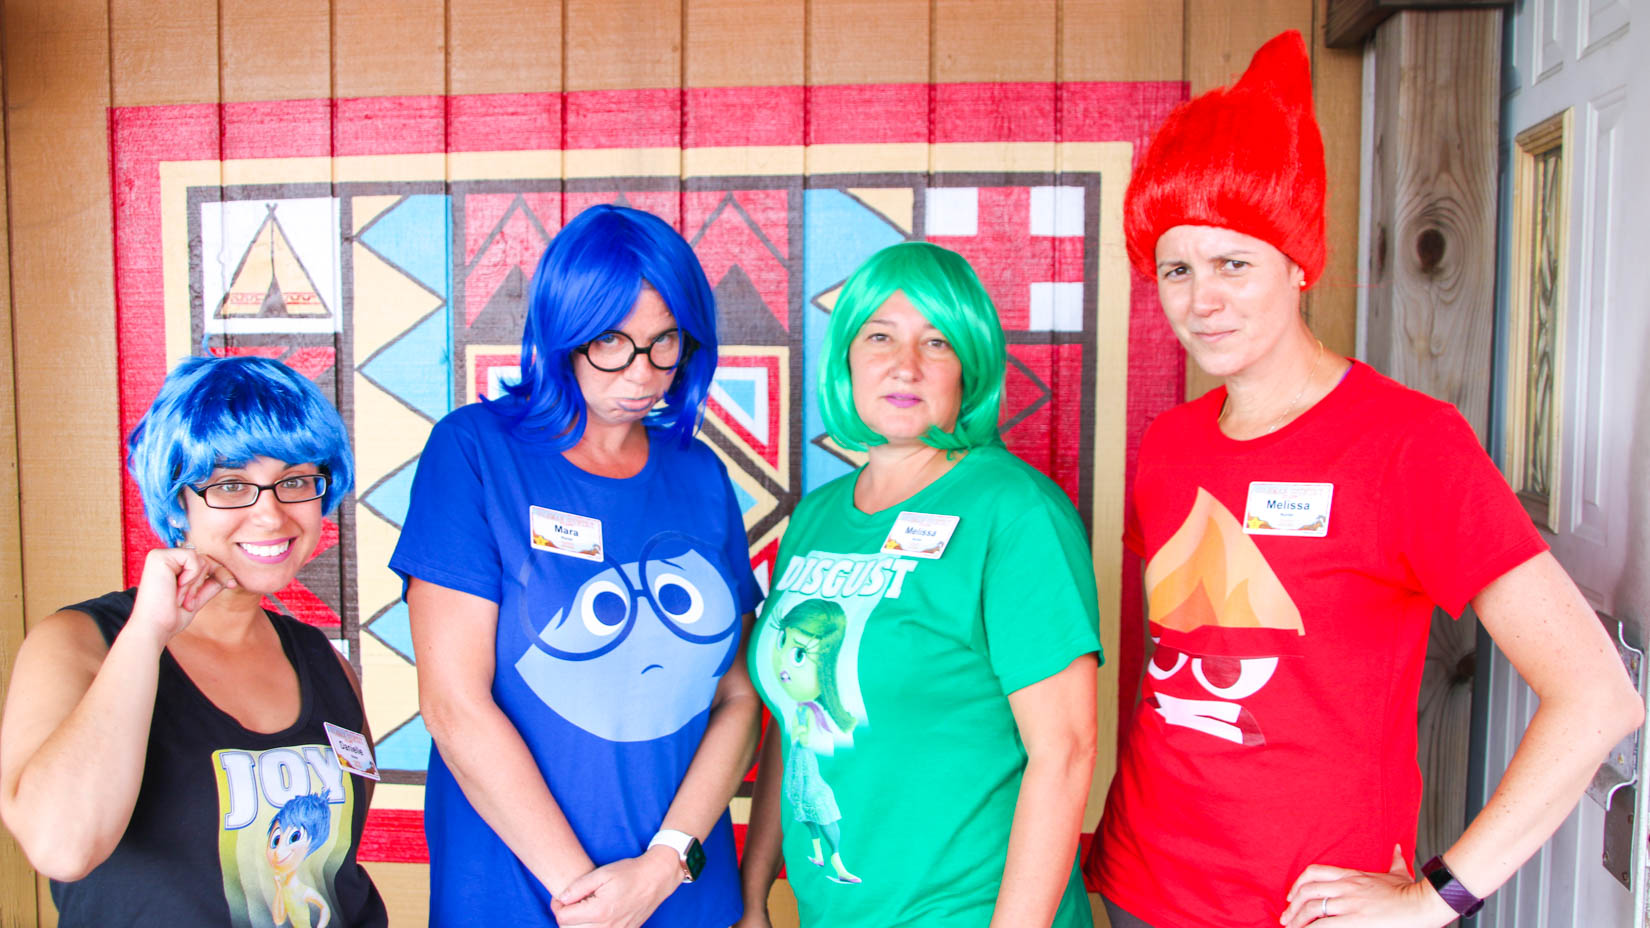 Counselor dressed up in "Inside Out" costumes.